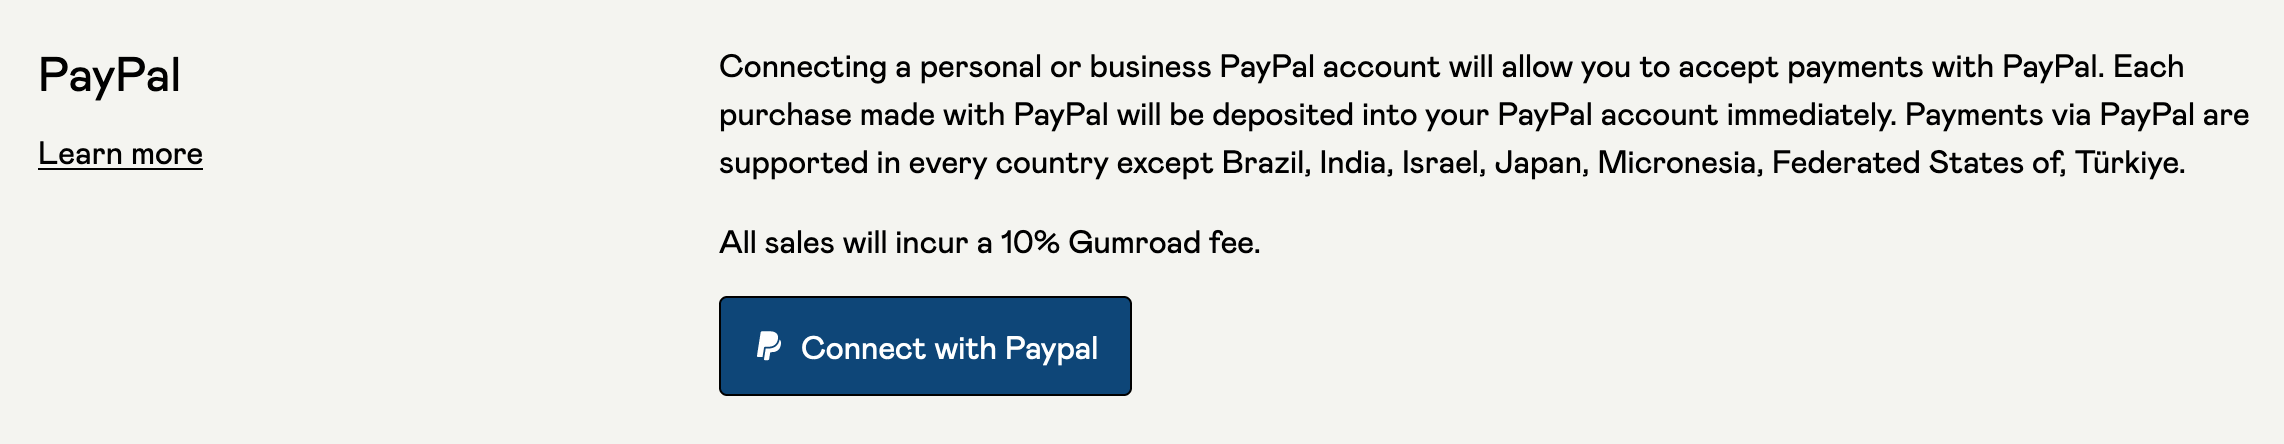 Connect with PayPal